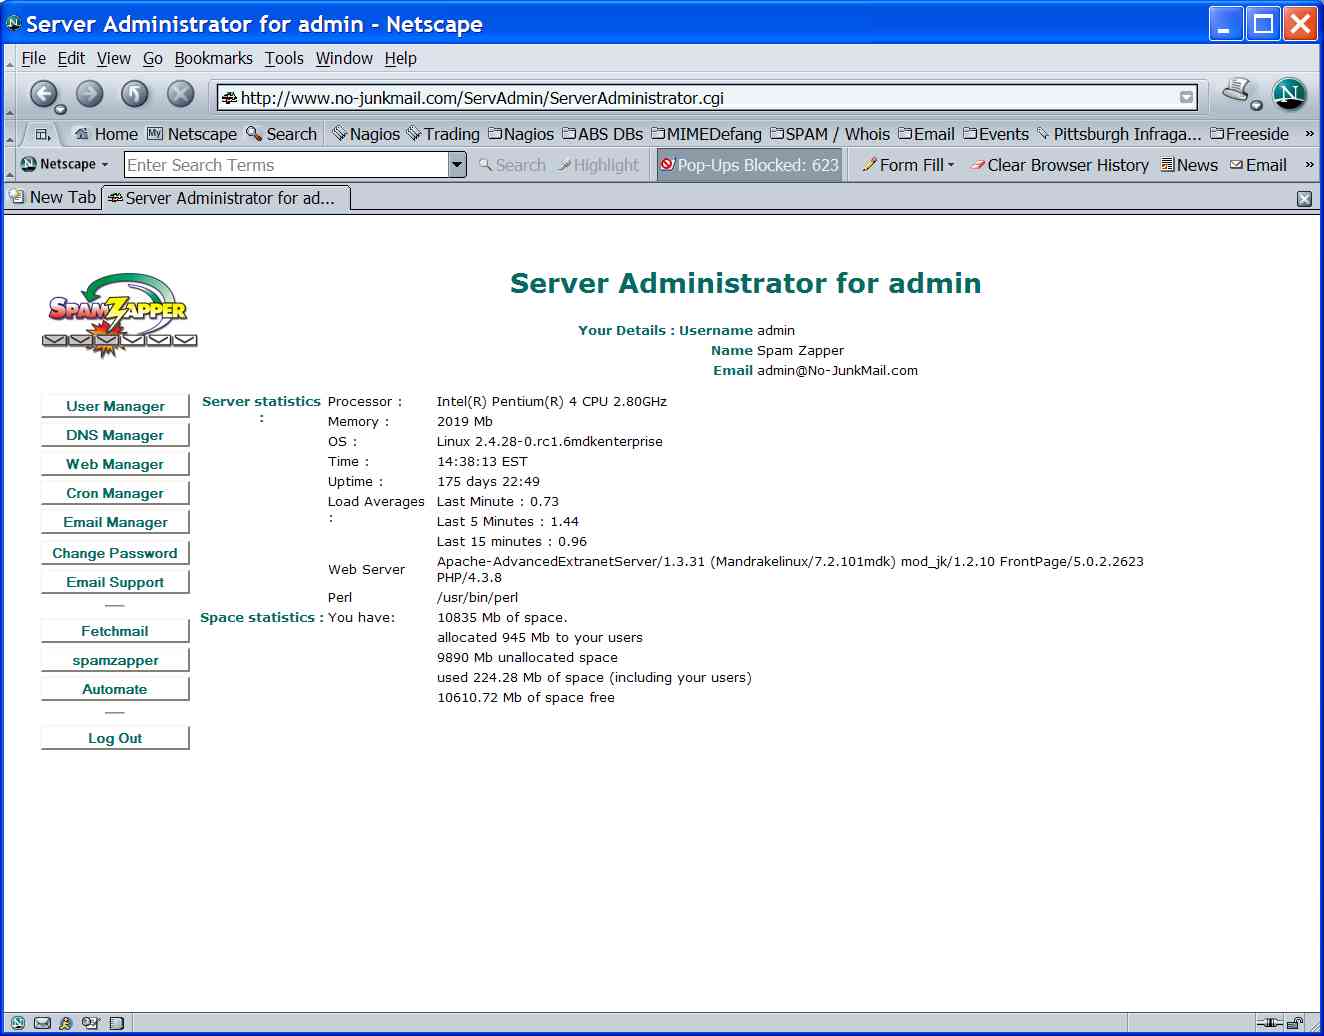 The Server Administrator view for Administration of servers.